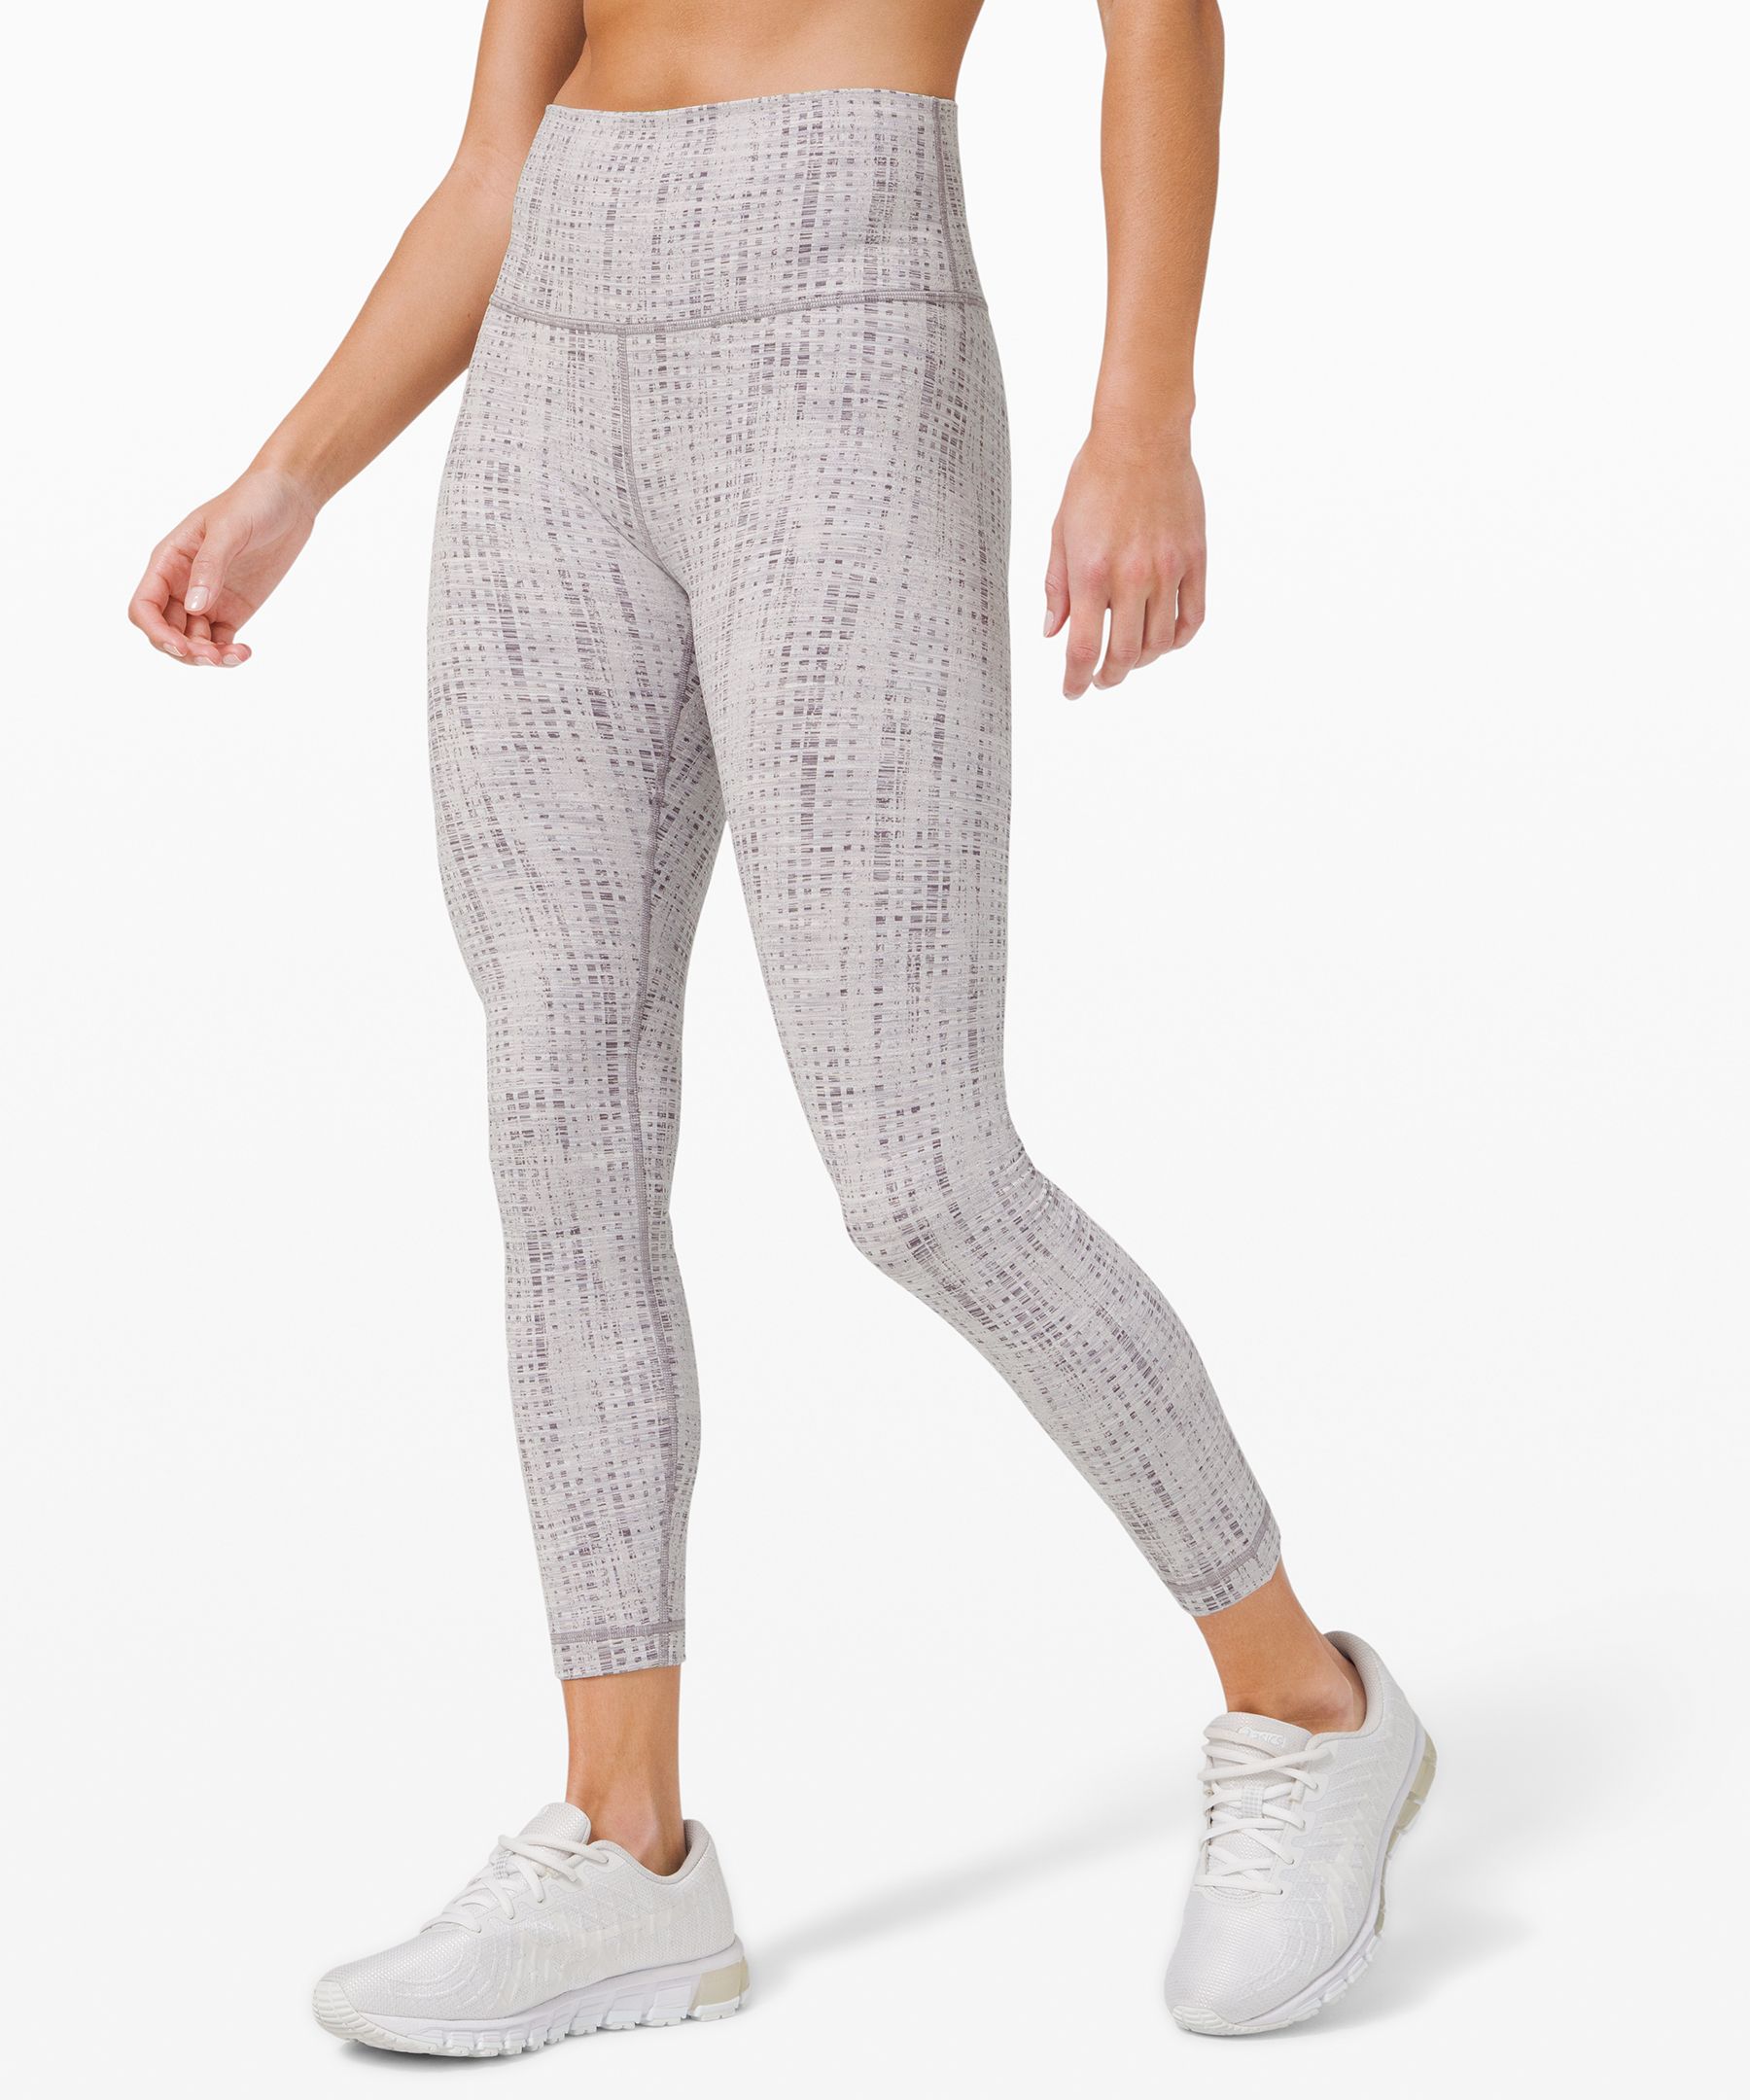 Lululemon Wunder Under High-rise 7/8 Tight *luxtreme 25" In Action Jacquard Moonphase Silver Lining